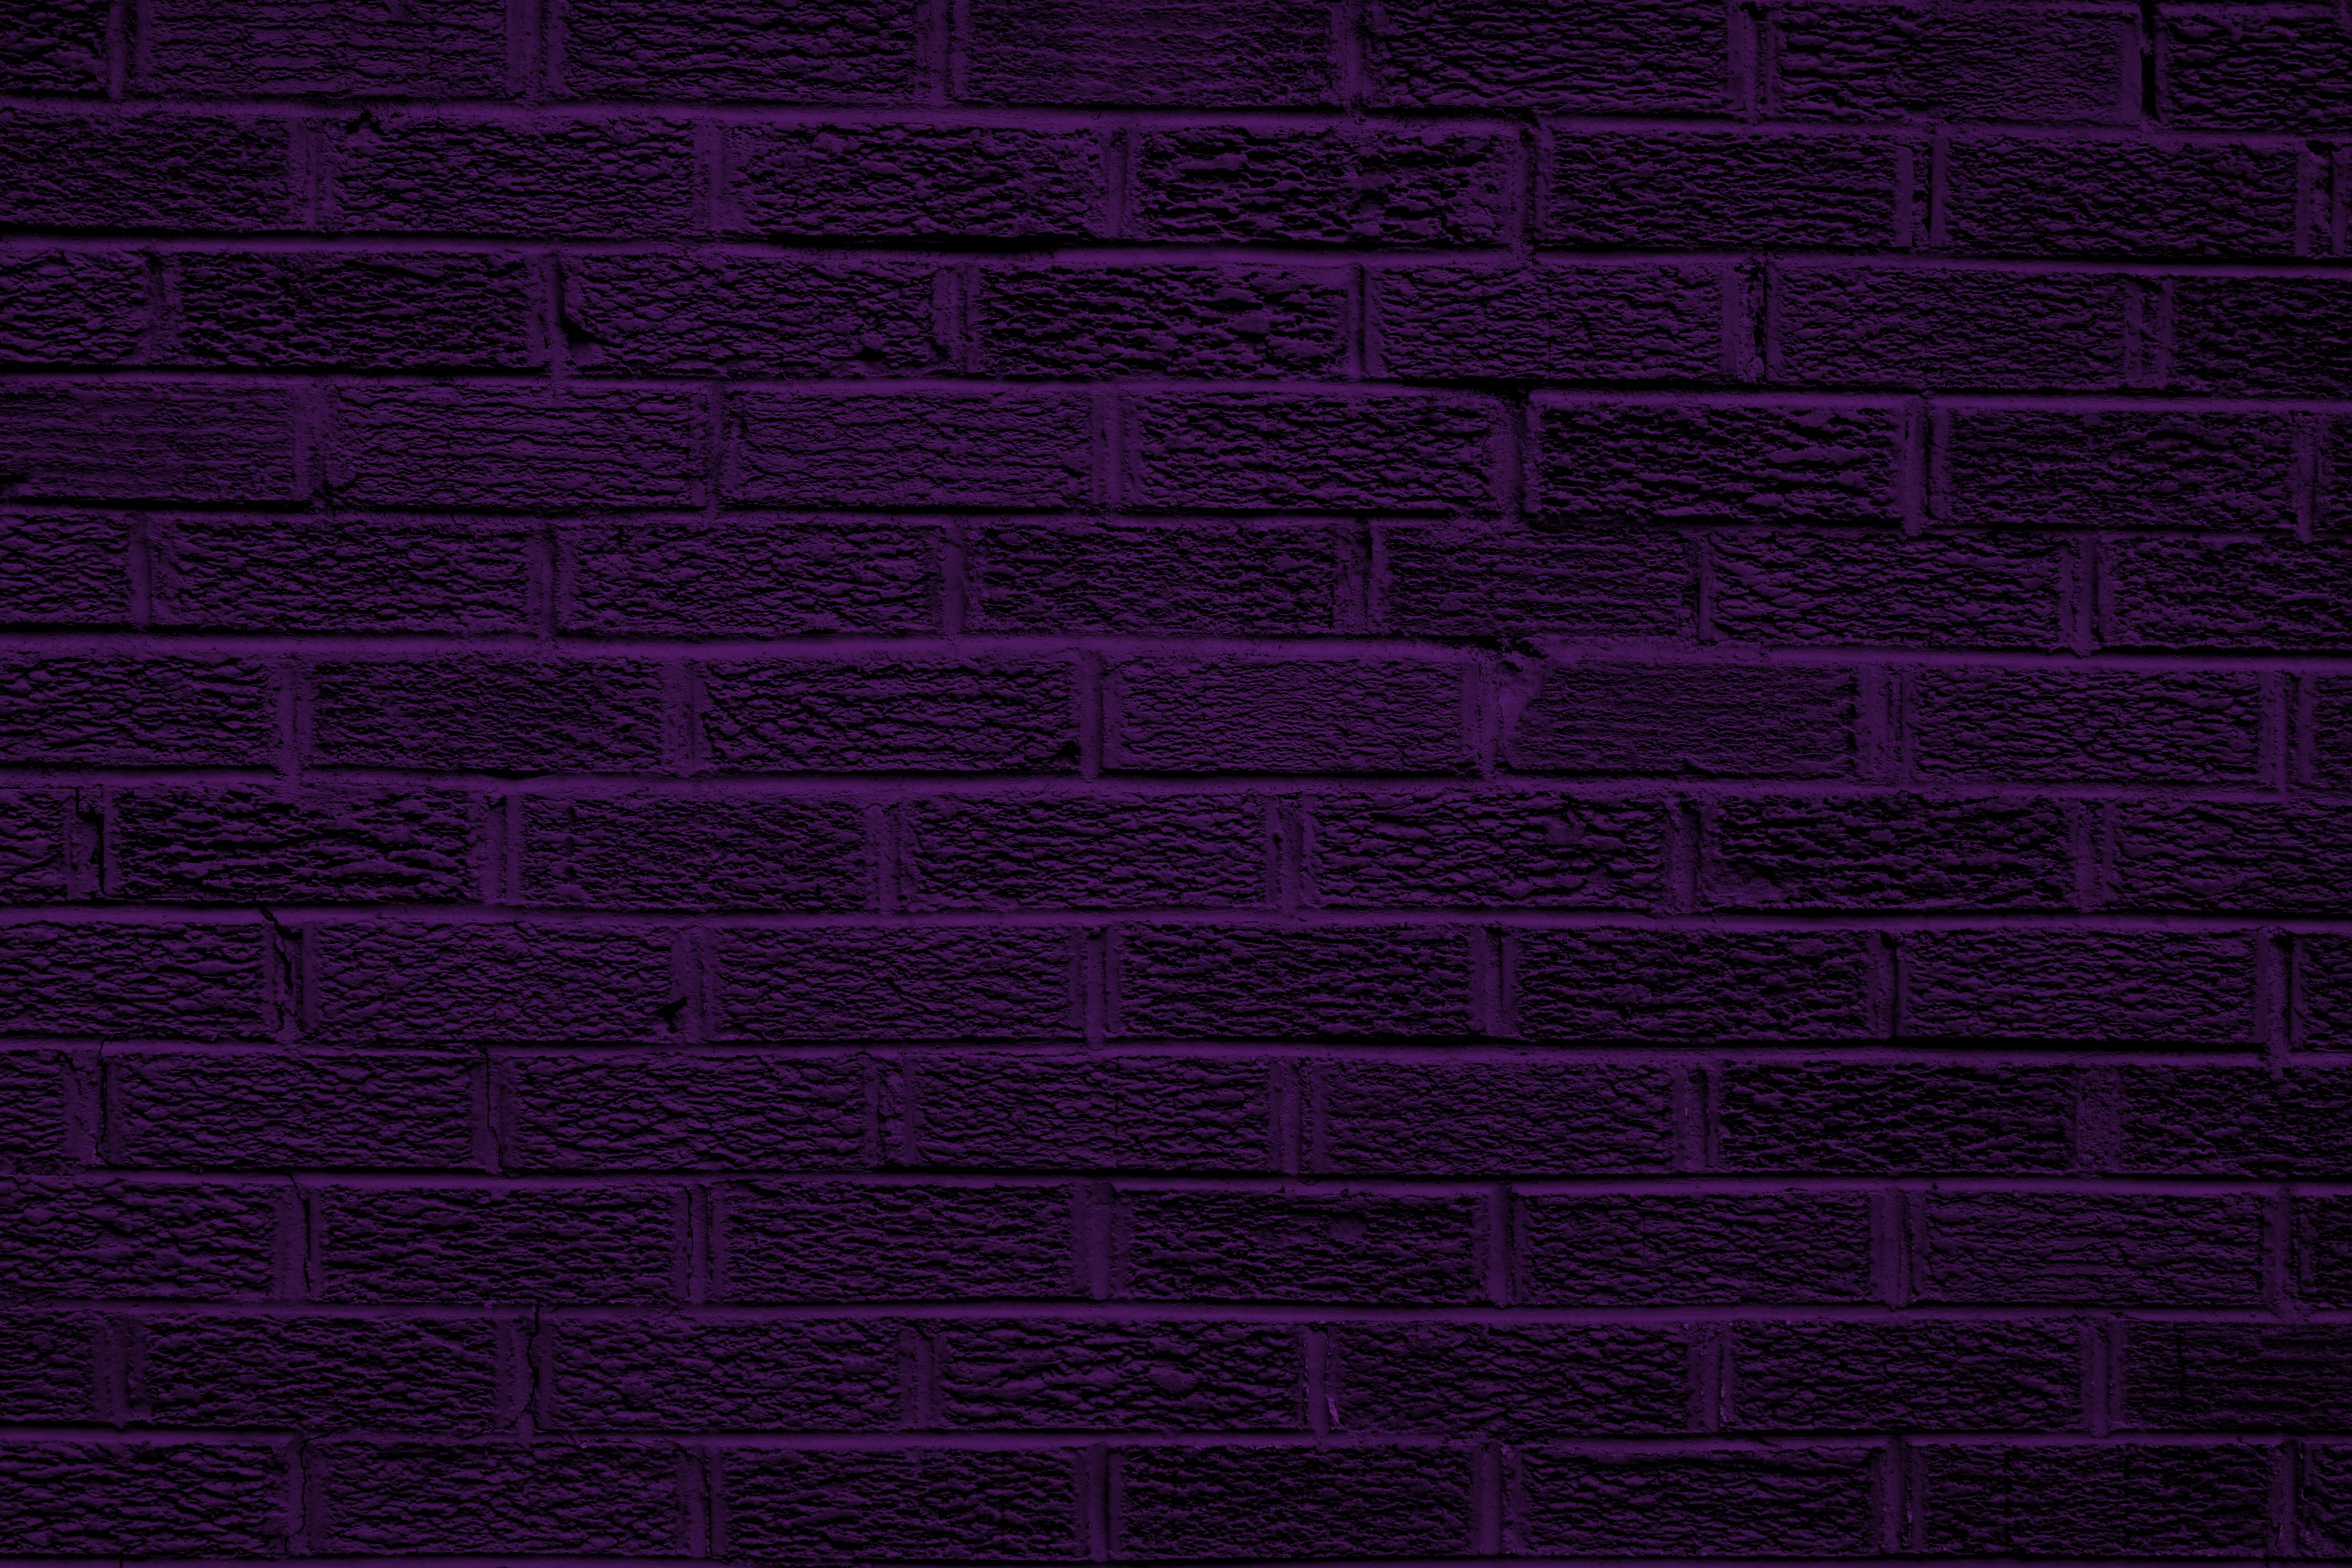 Dark Purple Pattern Background Images Pictures   Becuo